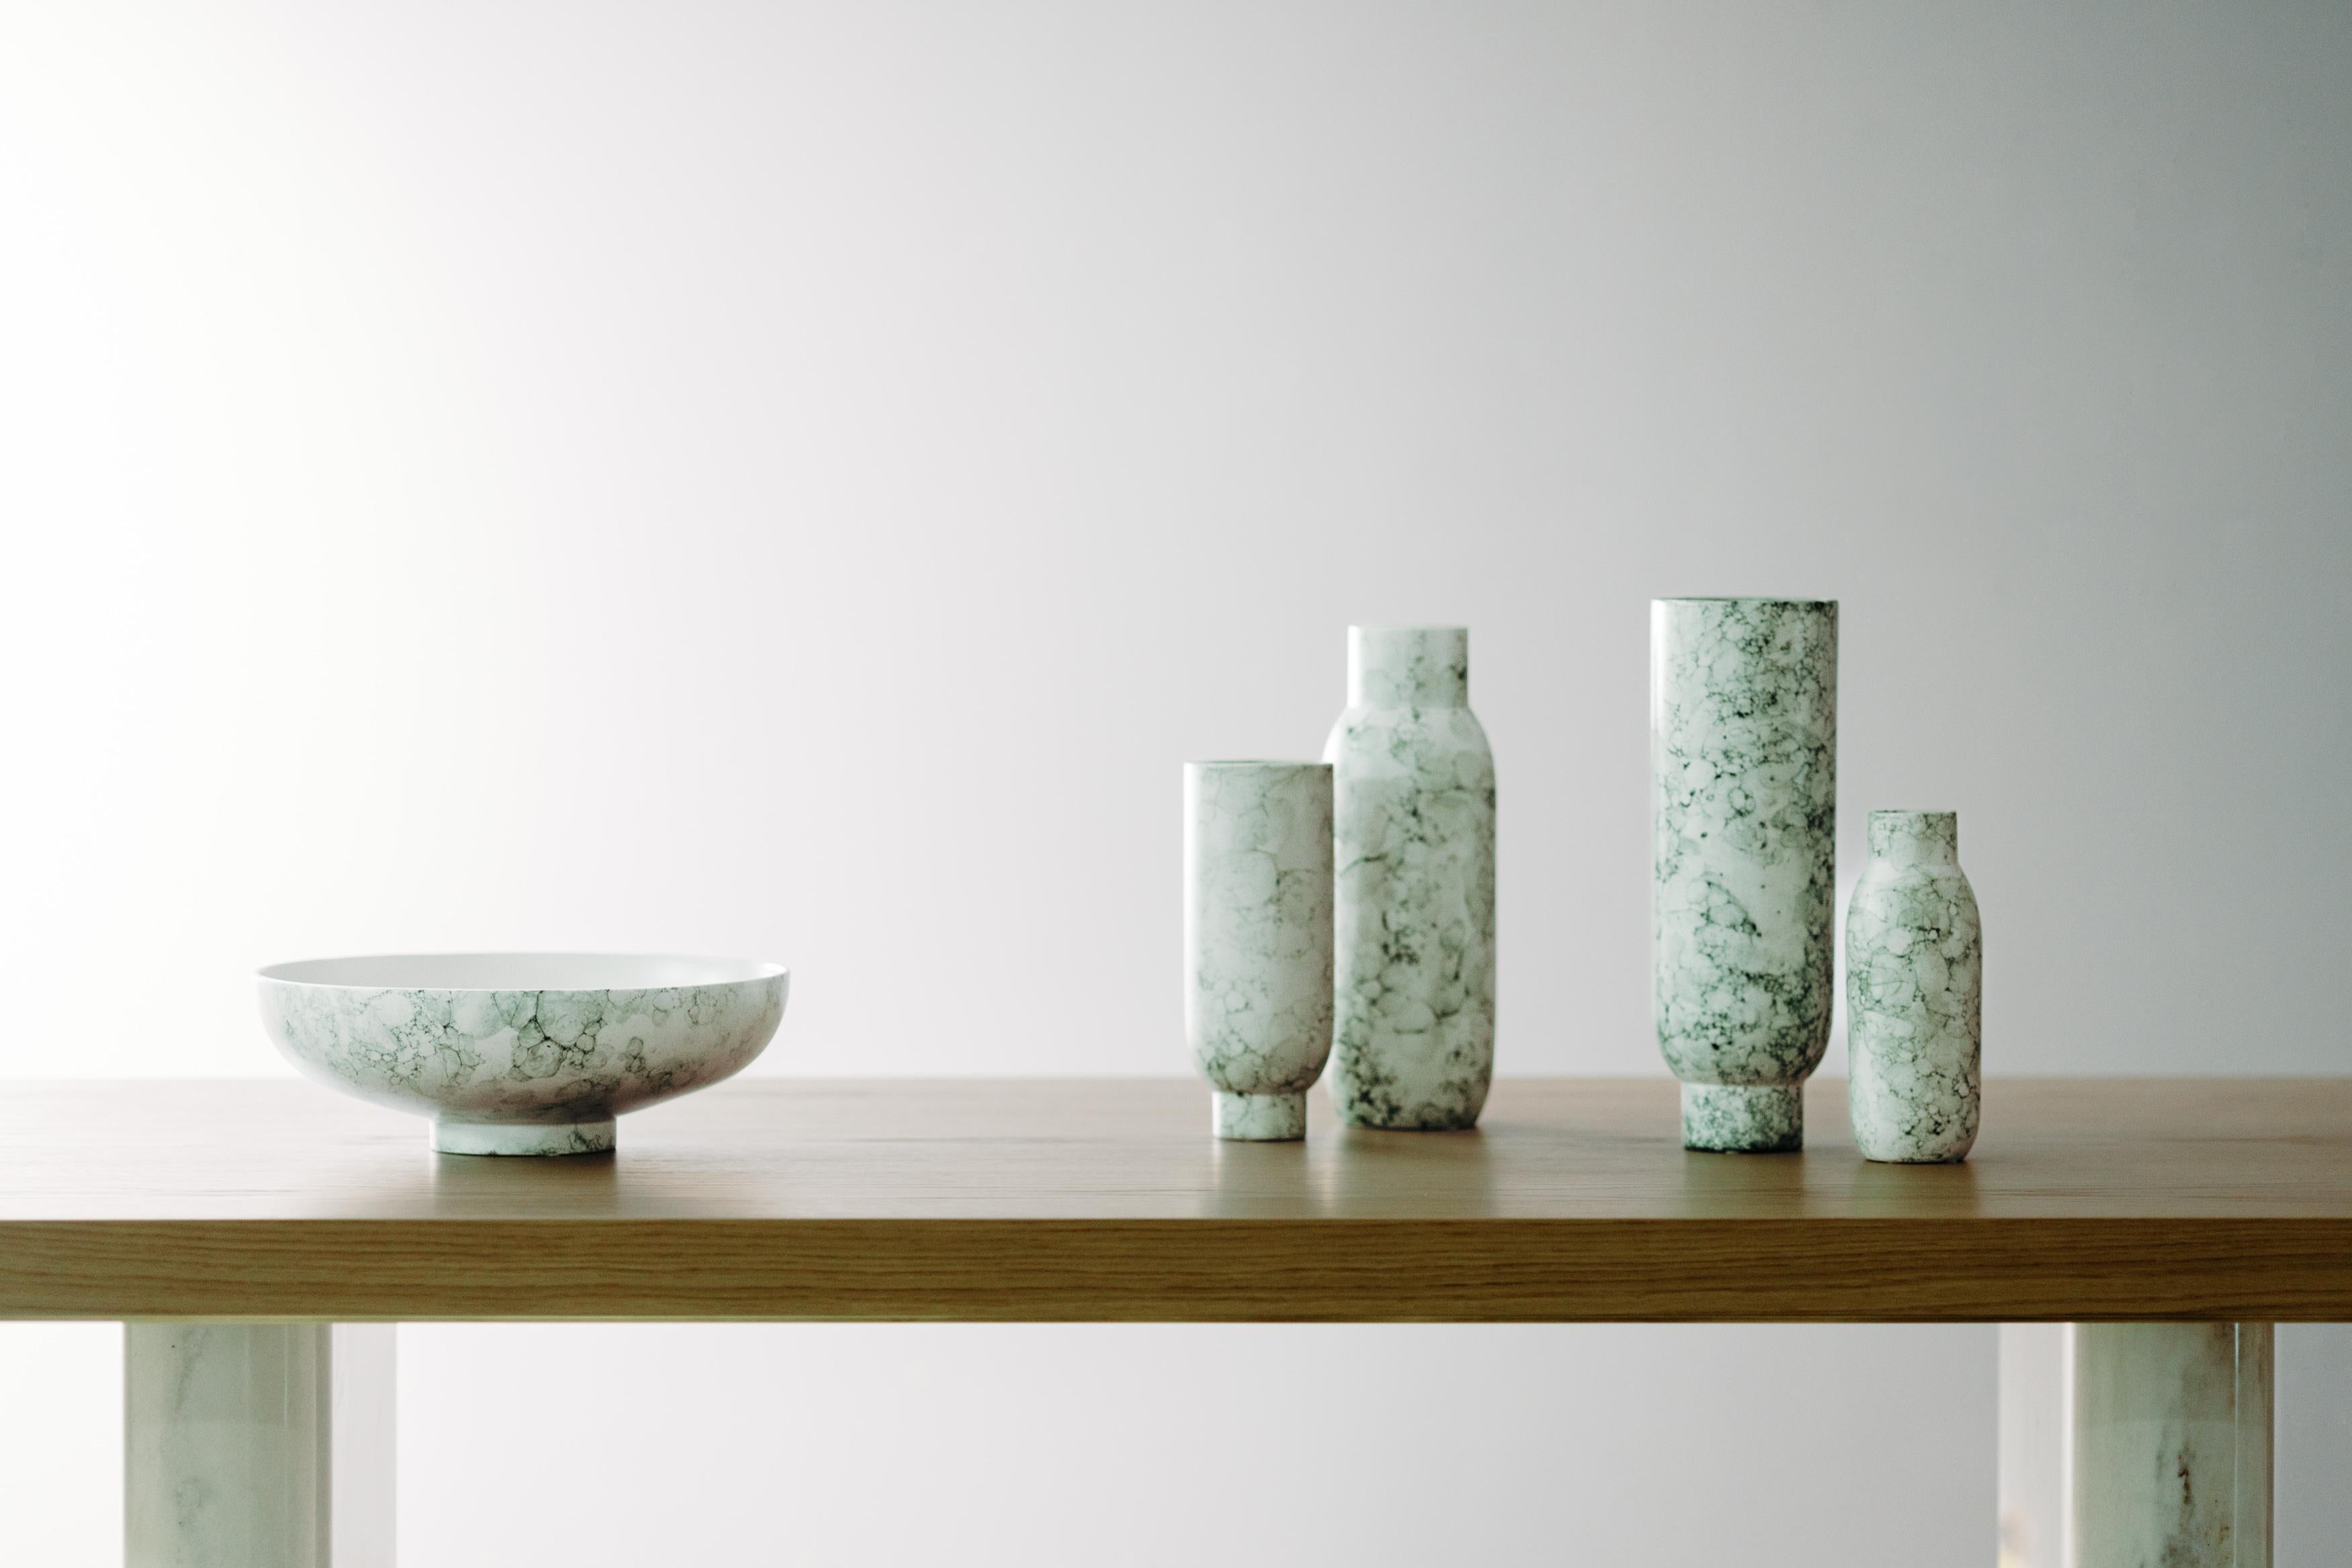 Set/5 Ceramic Vases and Bowl, White & Green, Lusitanus Home Collection, Handcrafted in Portugal - Europe by Lusitanus Home.

This beautiful set includes four waterproof ceramic vases and one bowl, perfect to be displayed together in endless